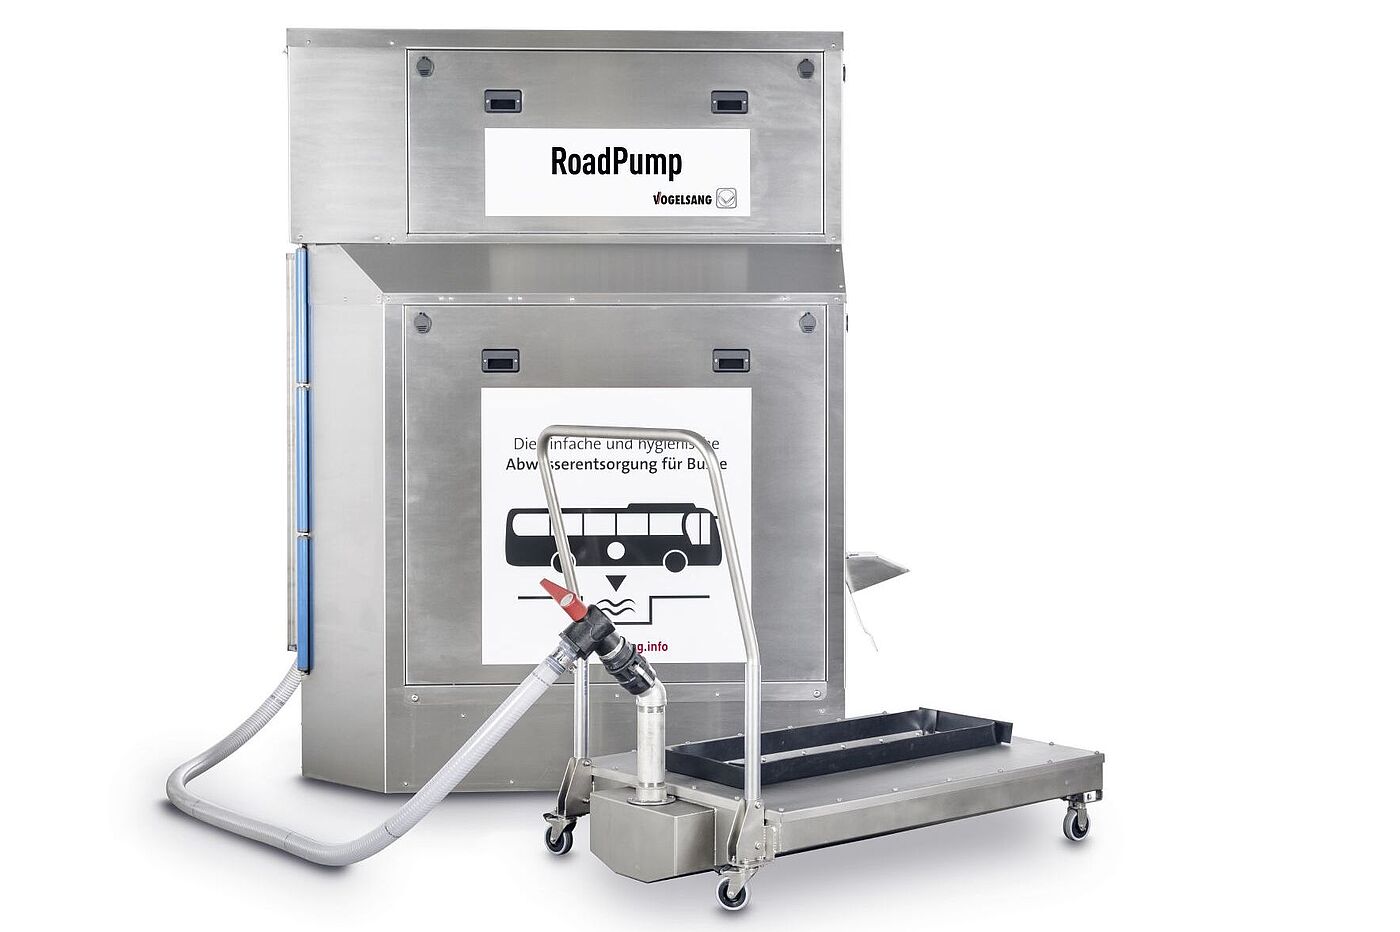 RoadPump Plus, the fresh water supply and wastewater disposal system for buses by Vogelsang